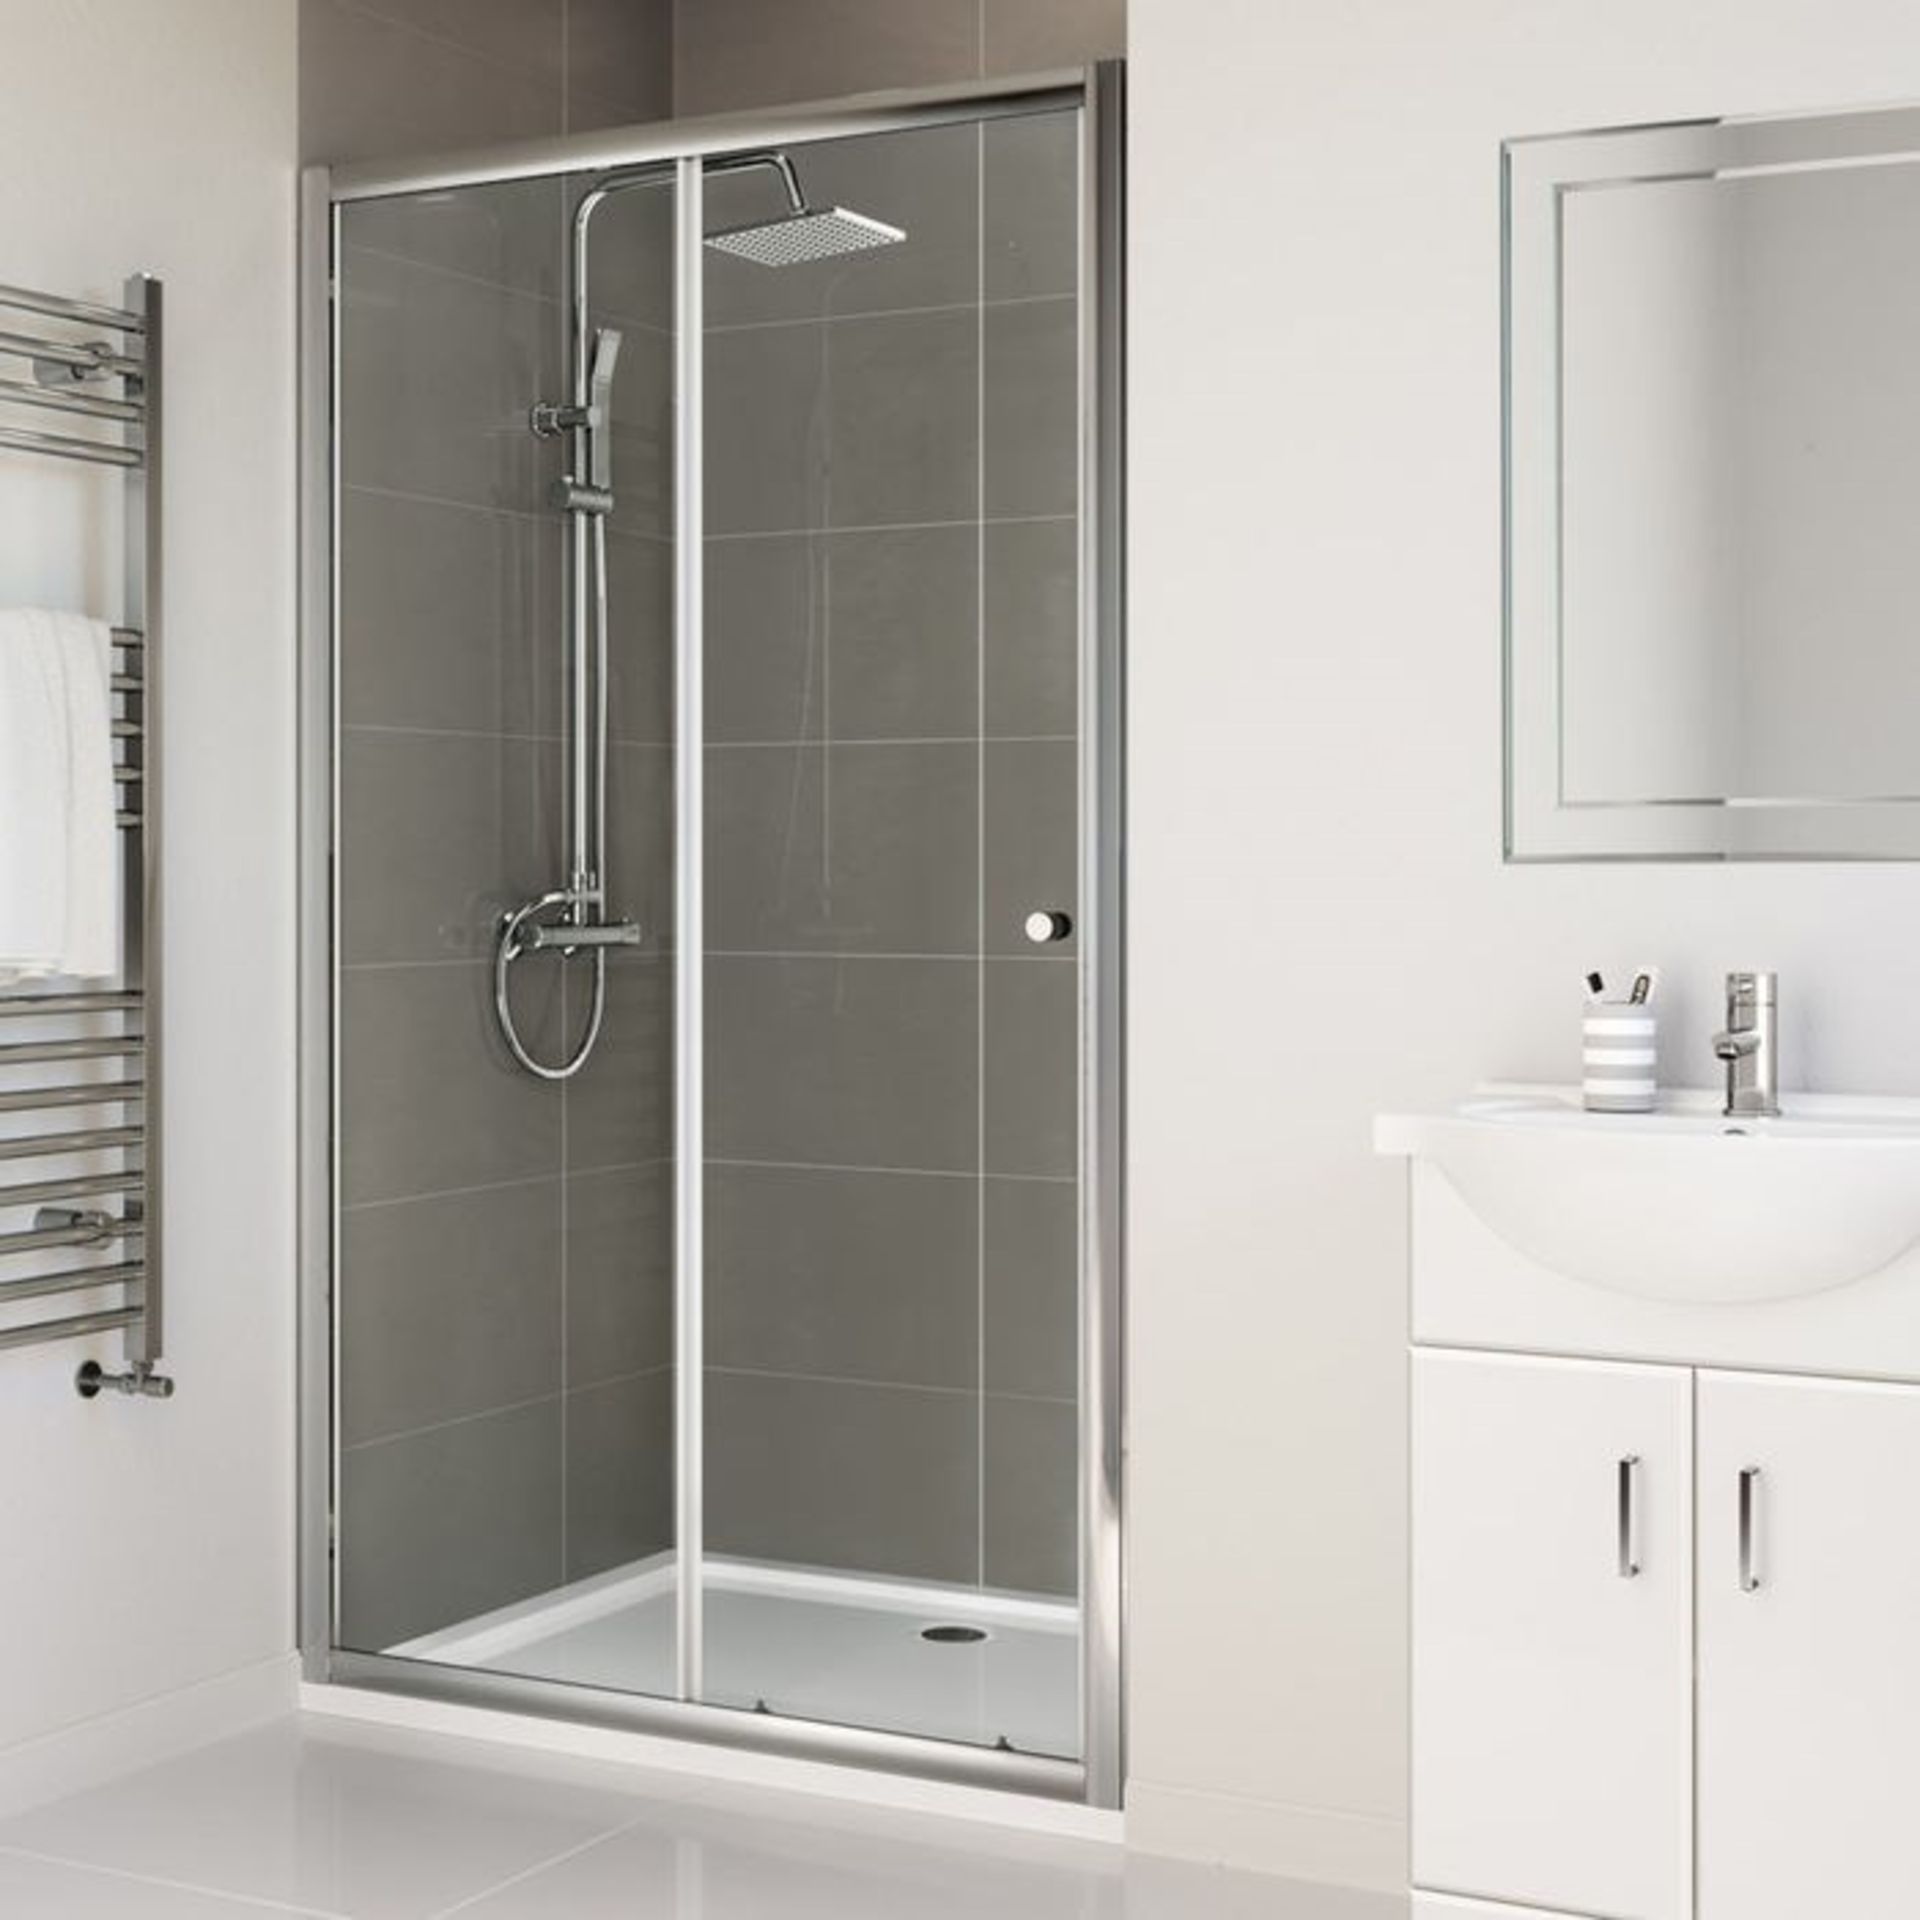 Twyfords 1000mm - Elements Sliding Shower Door. RRP £399.99.8mm Safety Glass Fully waterproof...